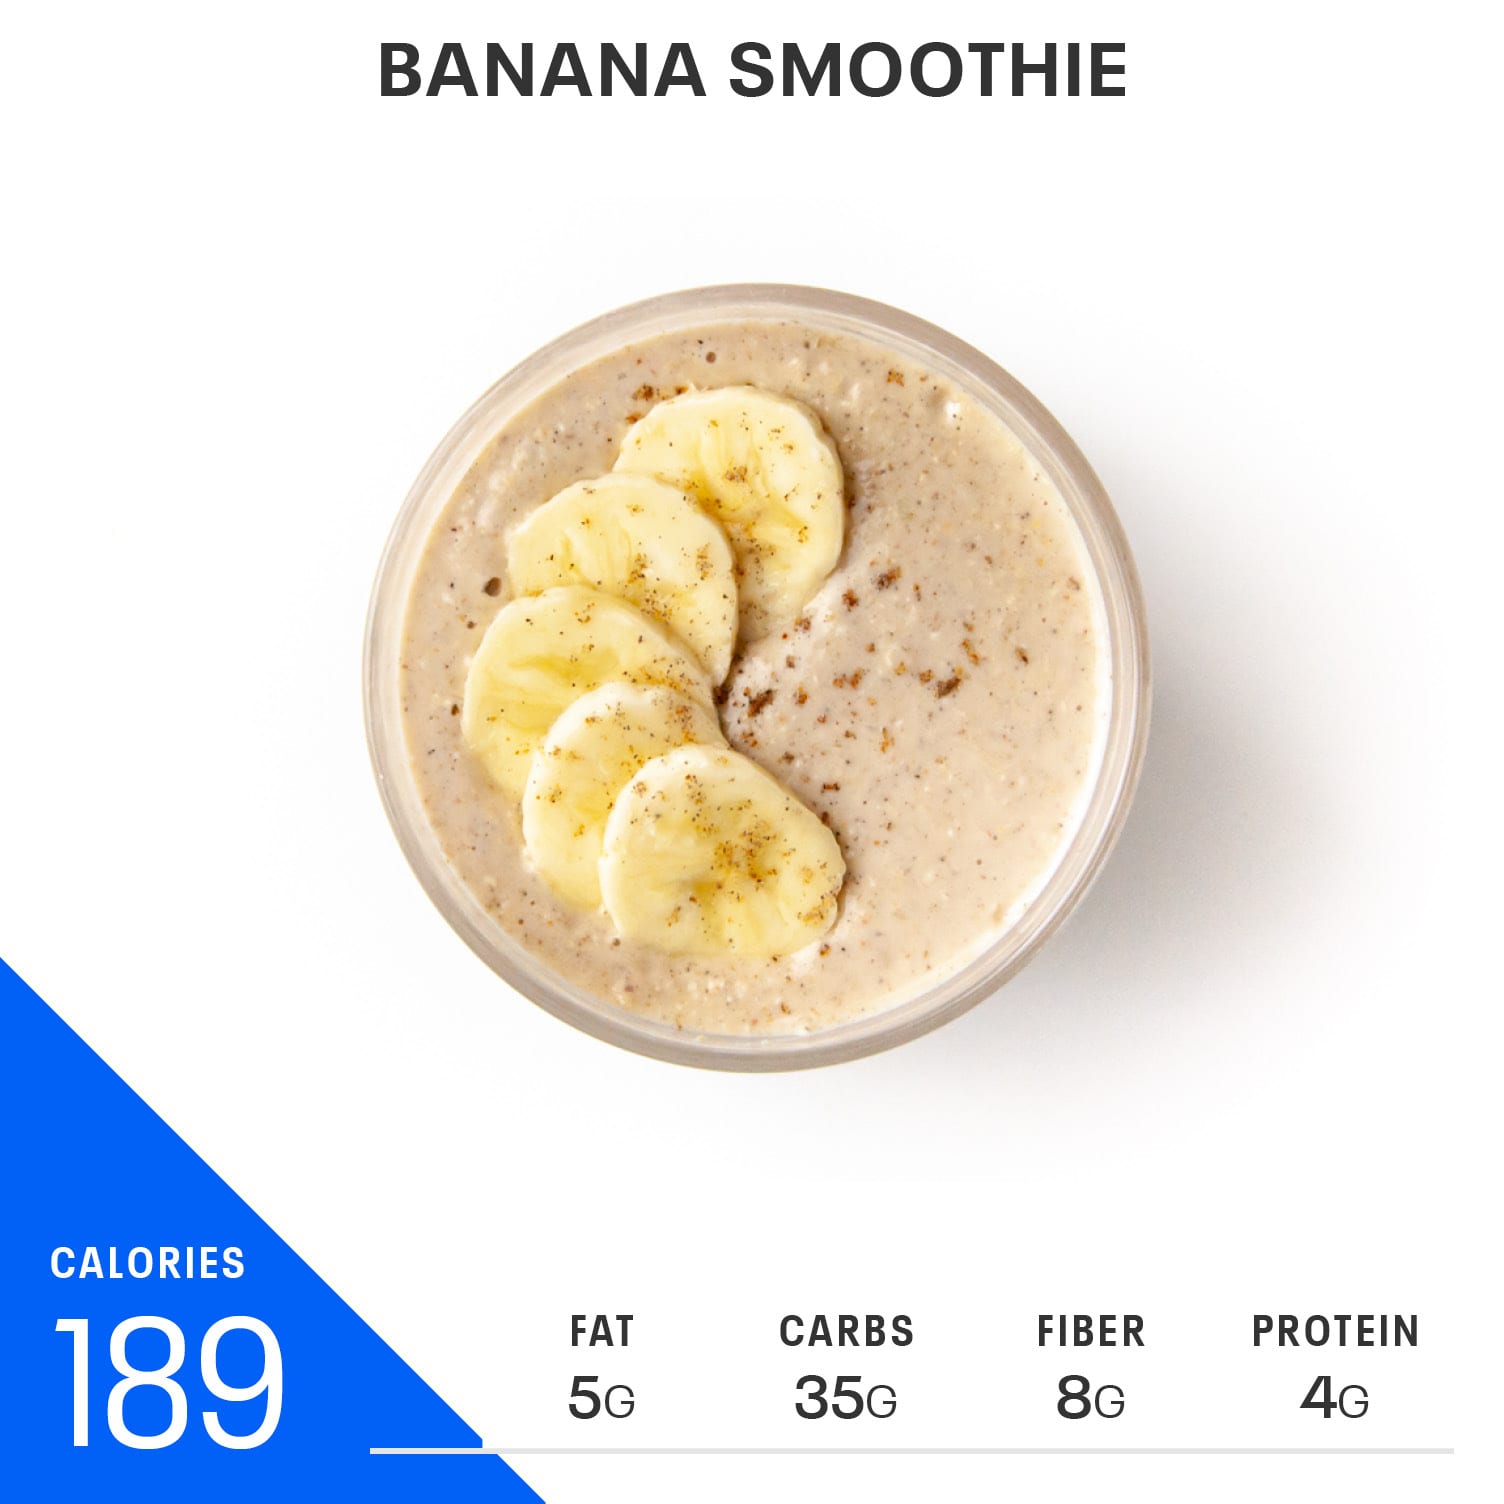 5 Nutritious Smoothies Under 200 Calories (Summer Edition)